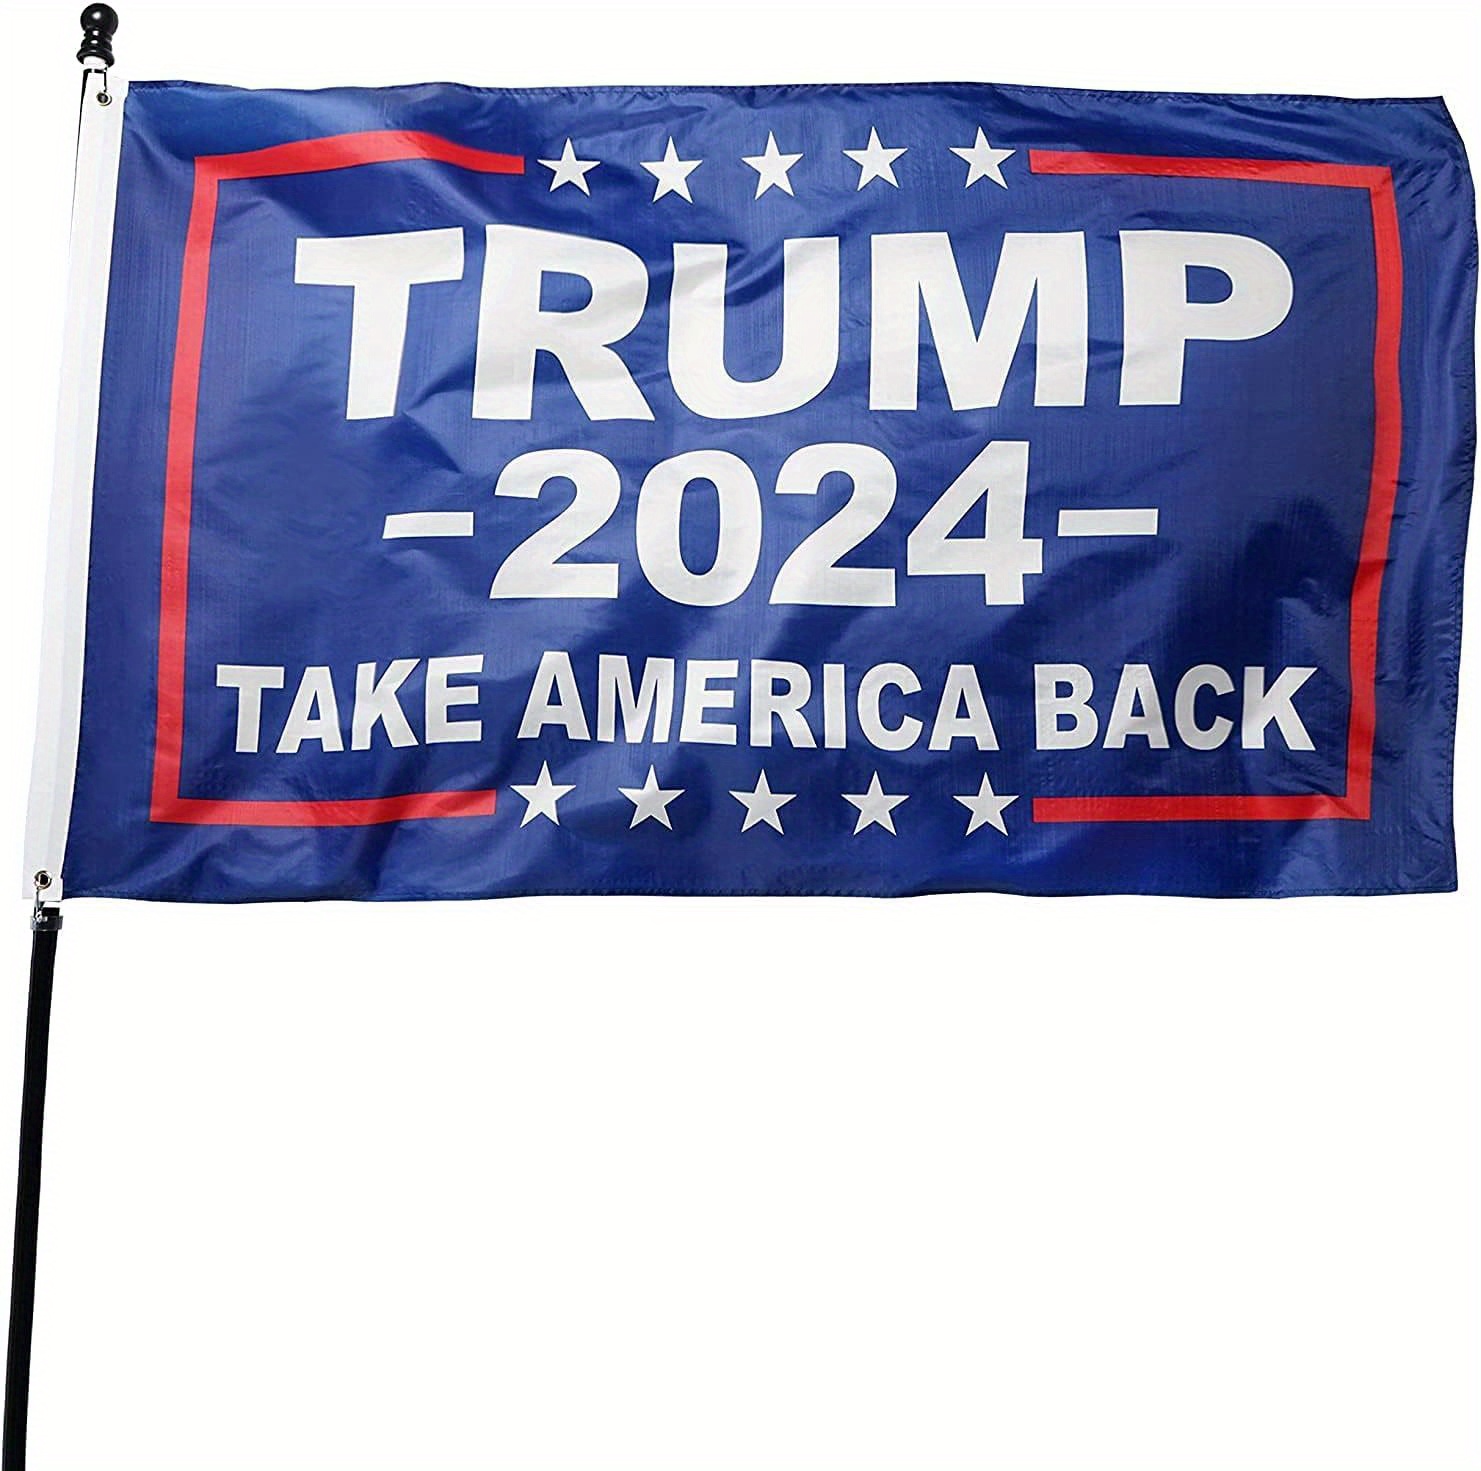 1pc donald trump for president 2024 take america back flag red 3x5 foot with grommets party bunner party supplies party decor home decor room decor details 0